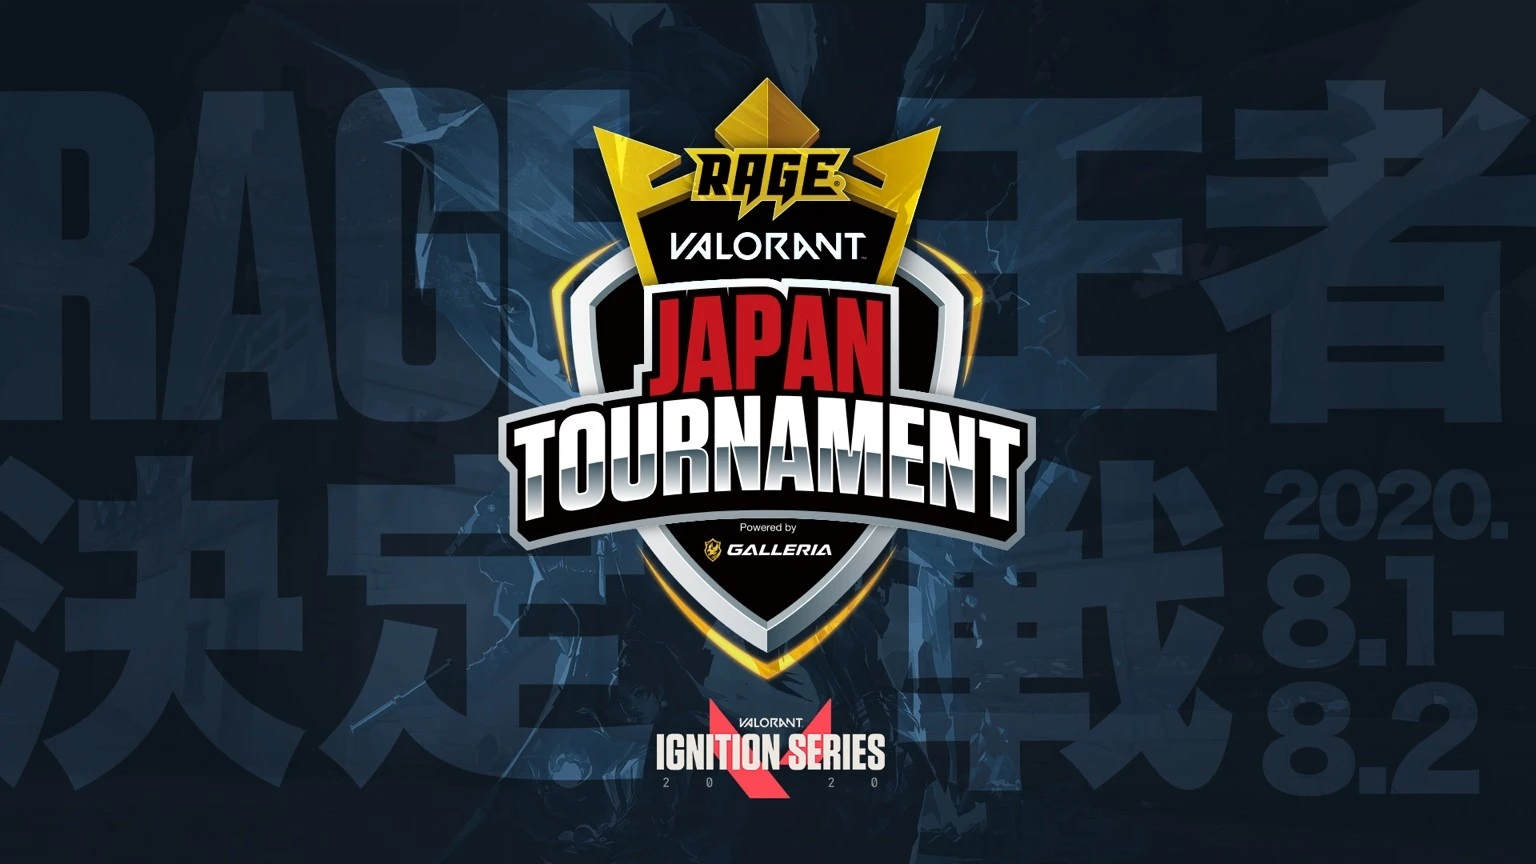 「RAGE VALORANT JAPAN TOURNAMENT Powered by GALLERIA」